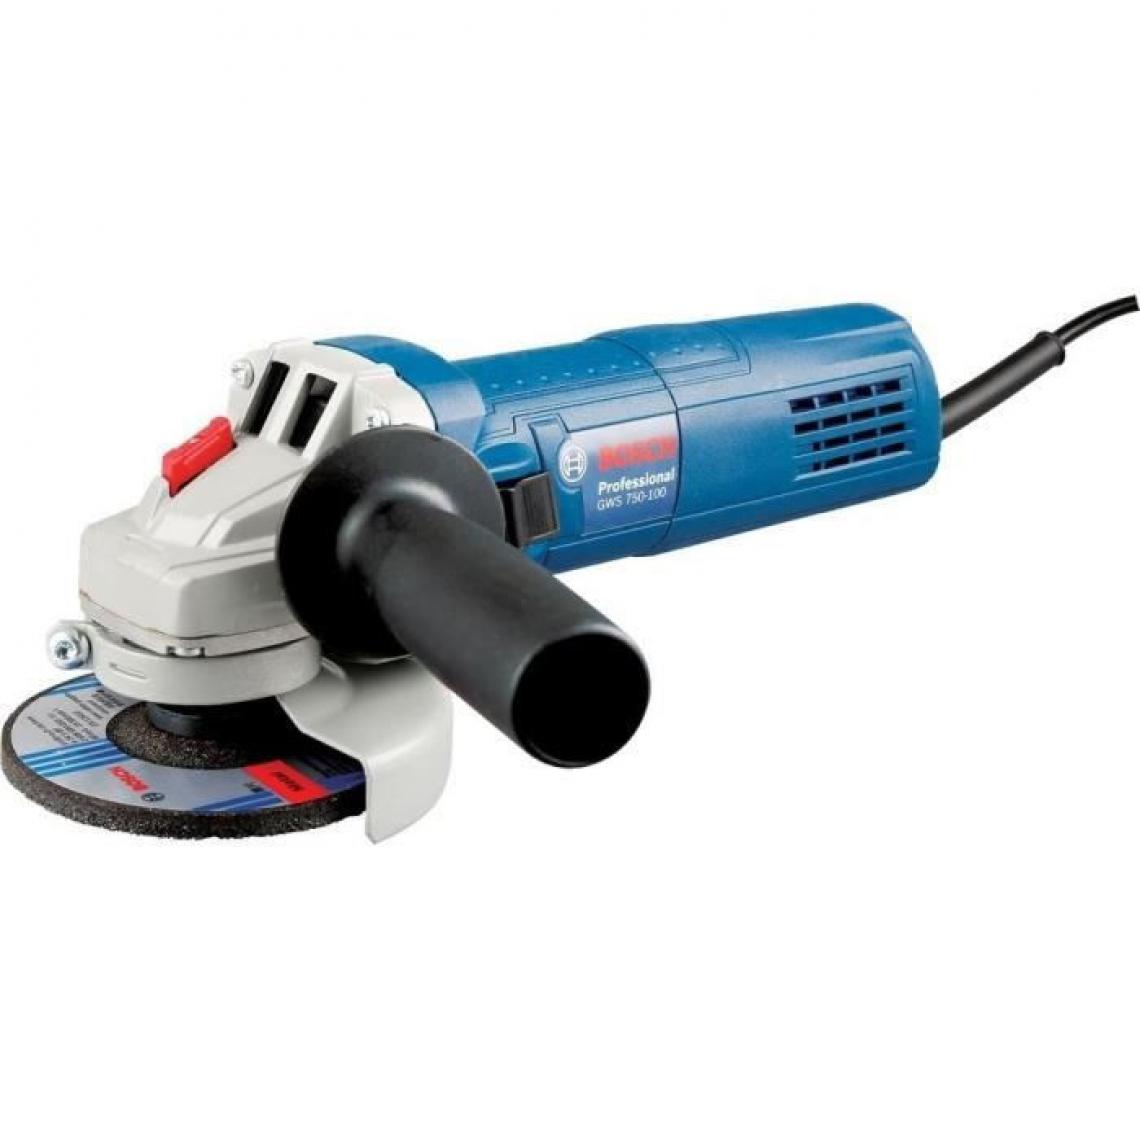 Bosch - BOSCH GWS750S Professional Meuleuse angulaire a 2 mains - 750 W - Meuleuses